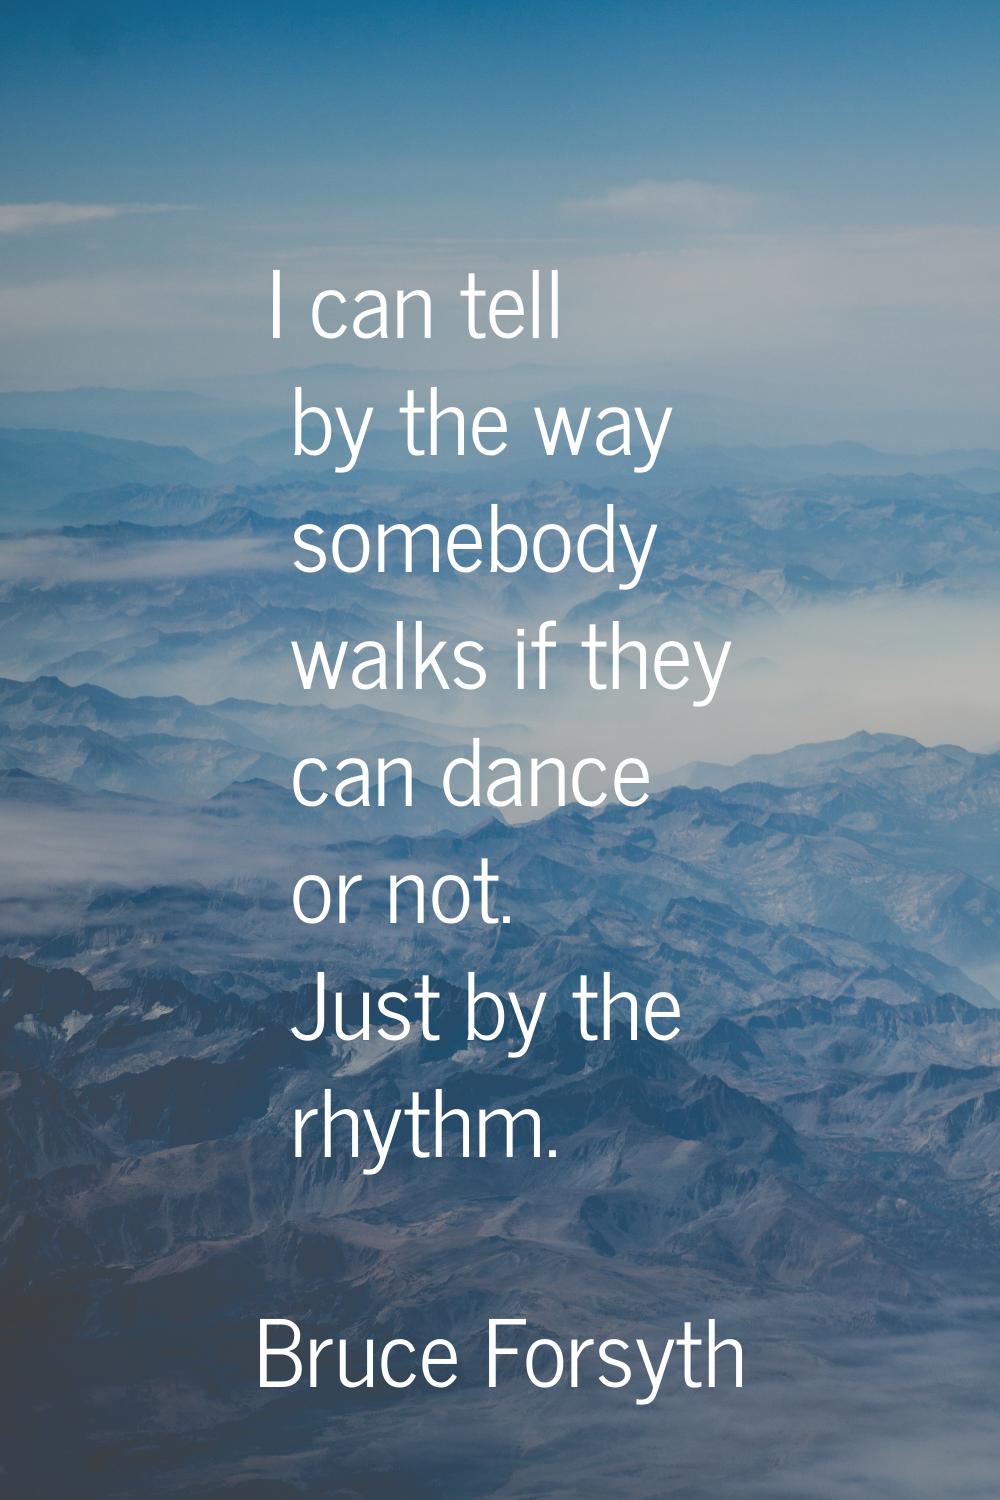 I can tell by the way somebody walks if they can dance or not. Just by the rhythm.